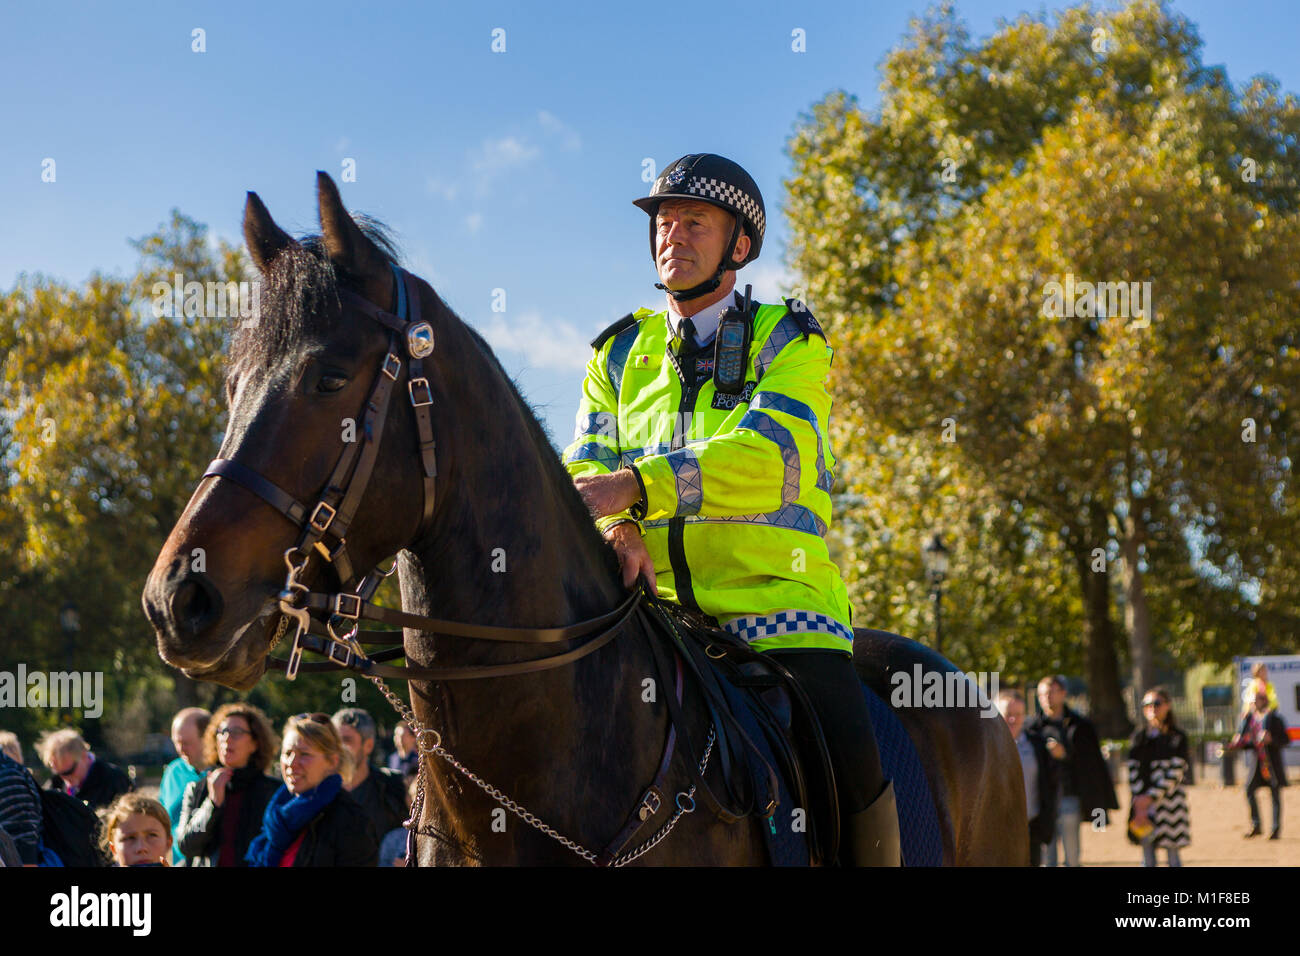 A Metropolitan policeman on horseback watches over a small crowd of people as they watch the Changing of the Guard at Horse Guards Parade, London. Stock Photo